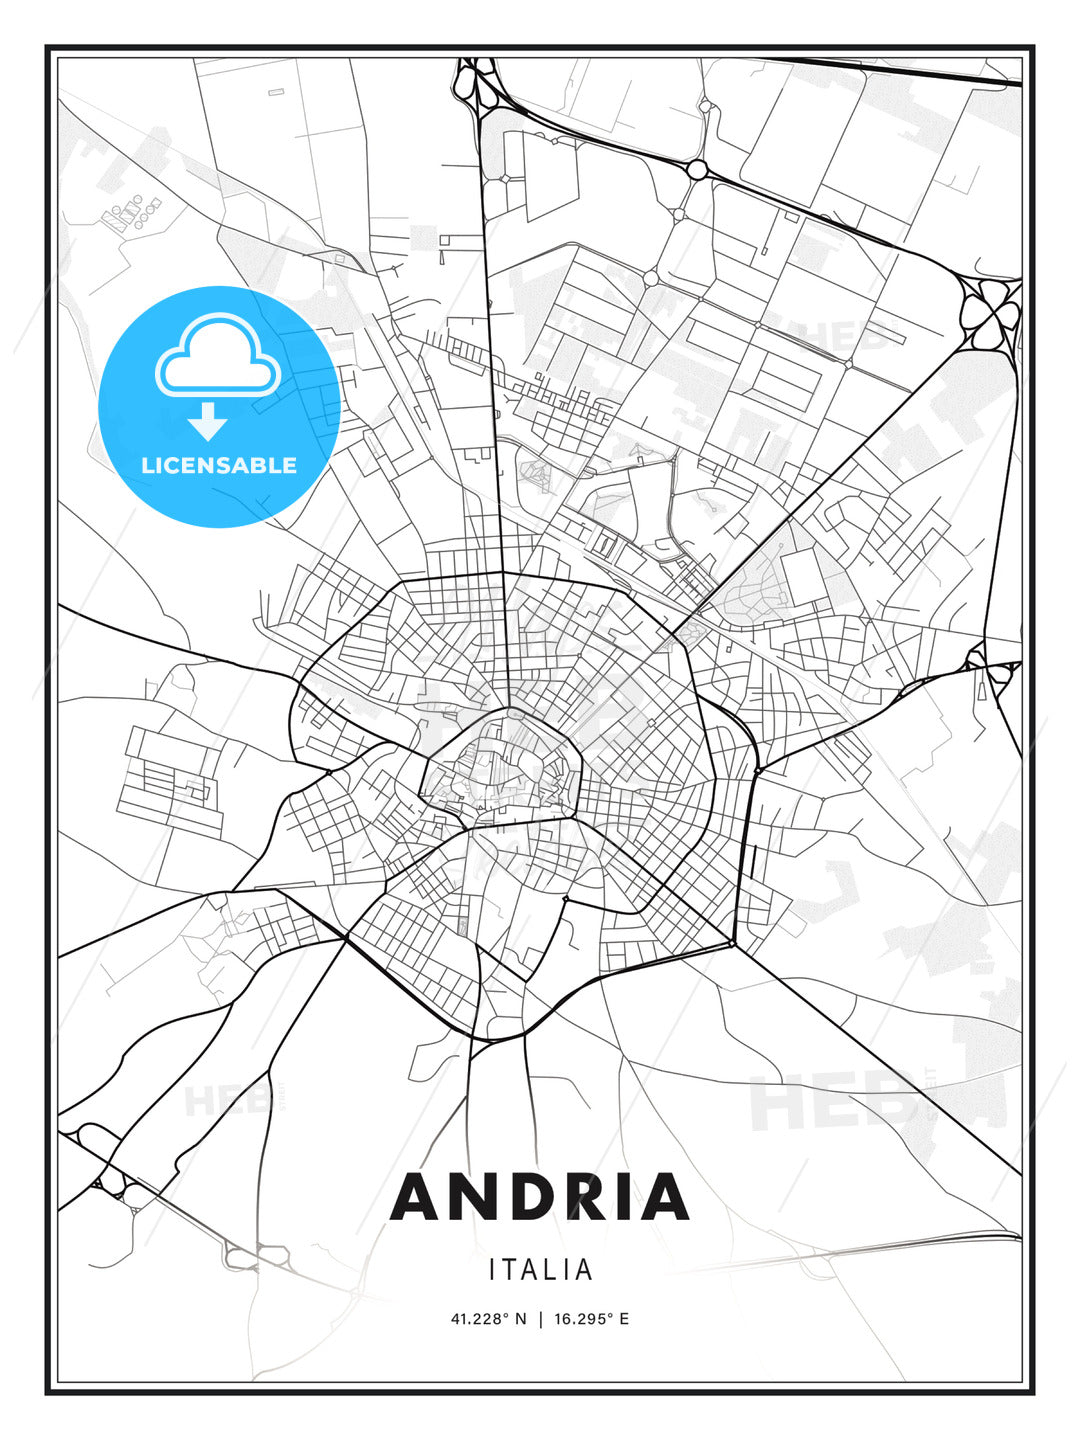 Andria, Italy, Modern Print Template in Various Formats - HEBSTREITS Sketches